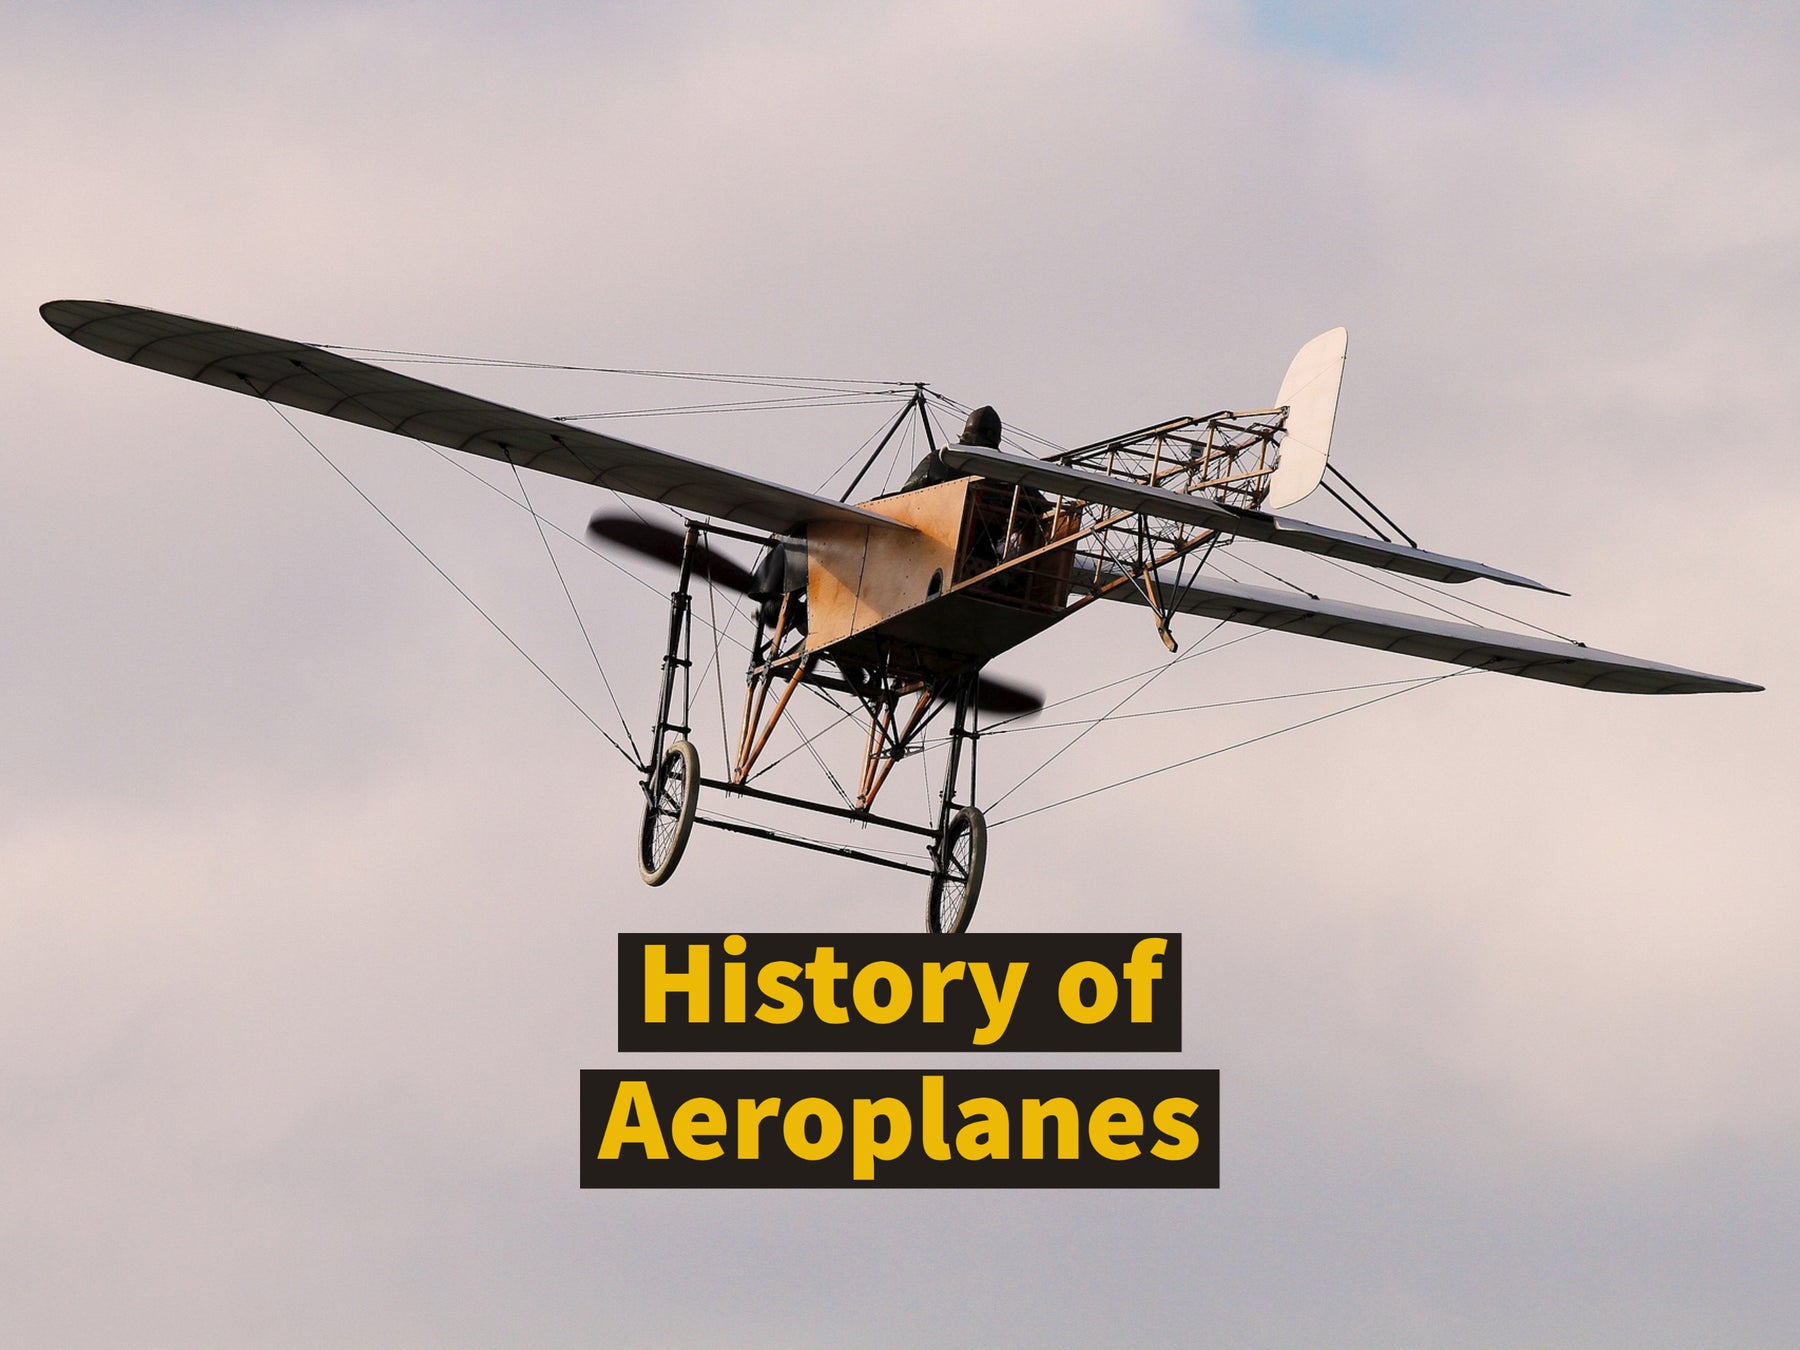 Aeroplane - Complete History with unknown facts